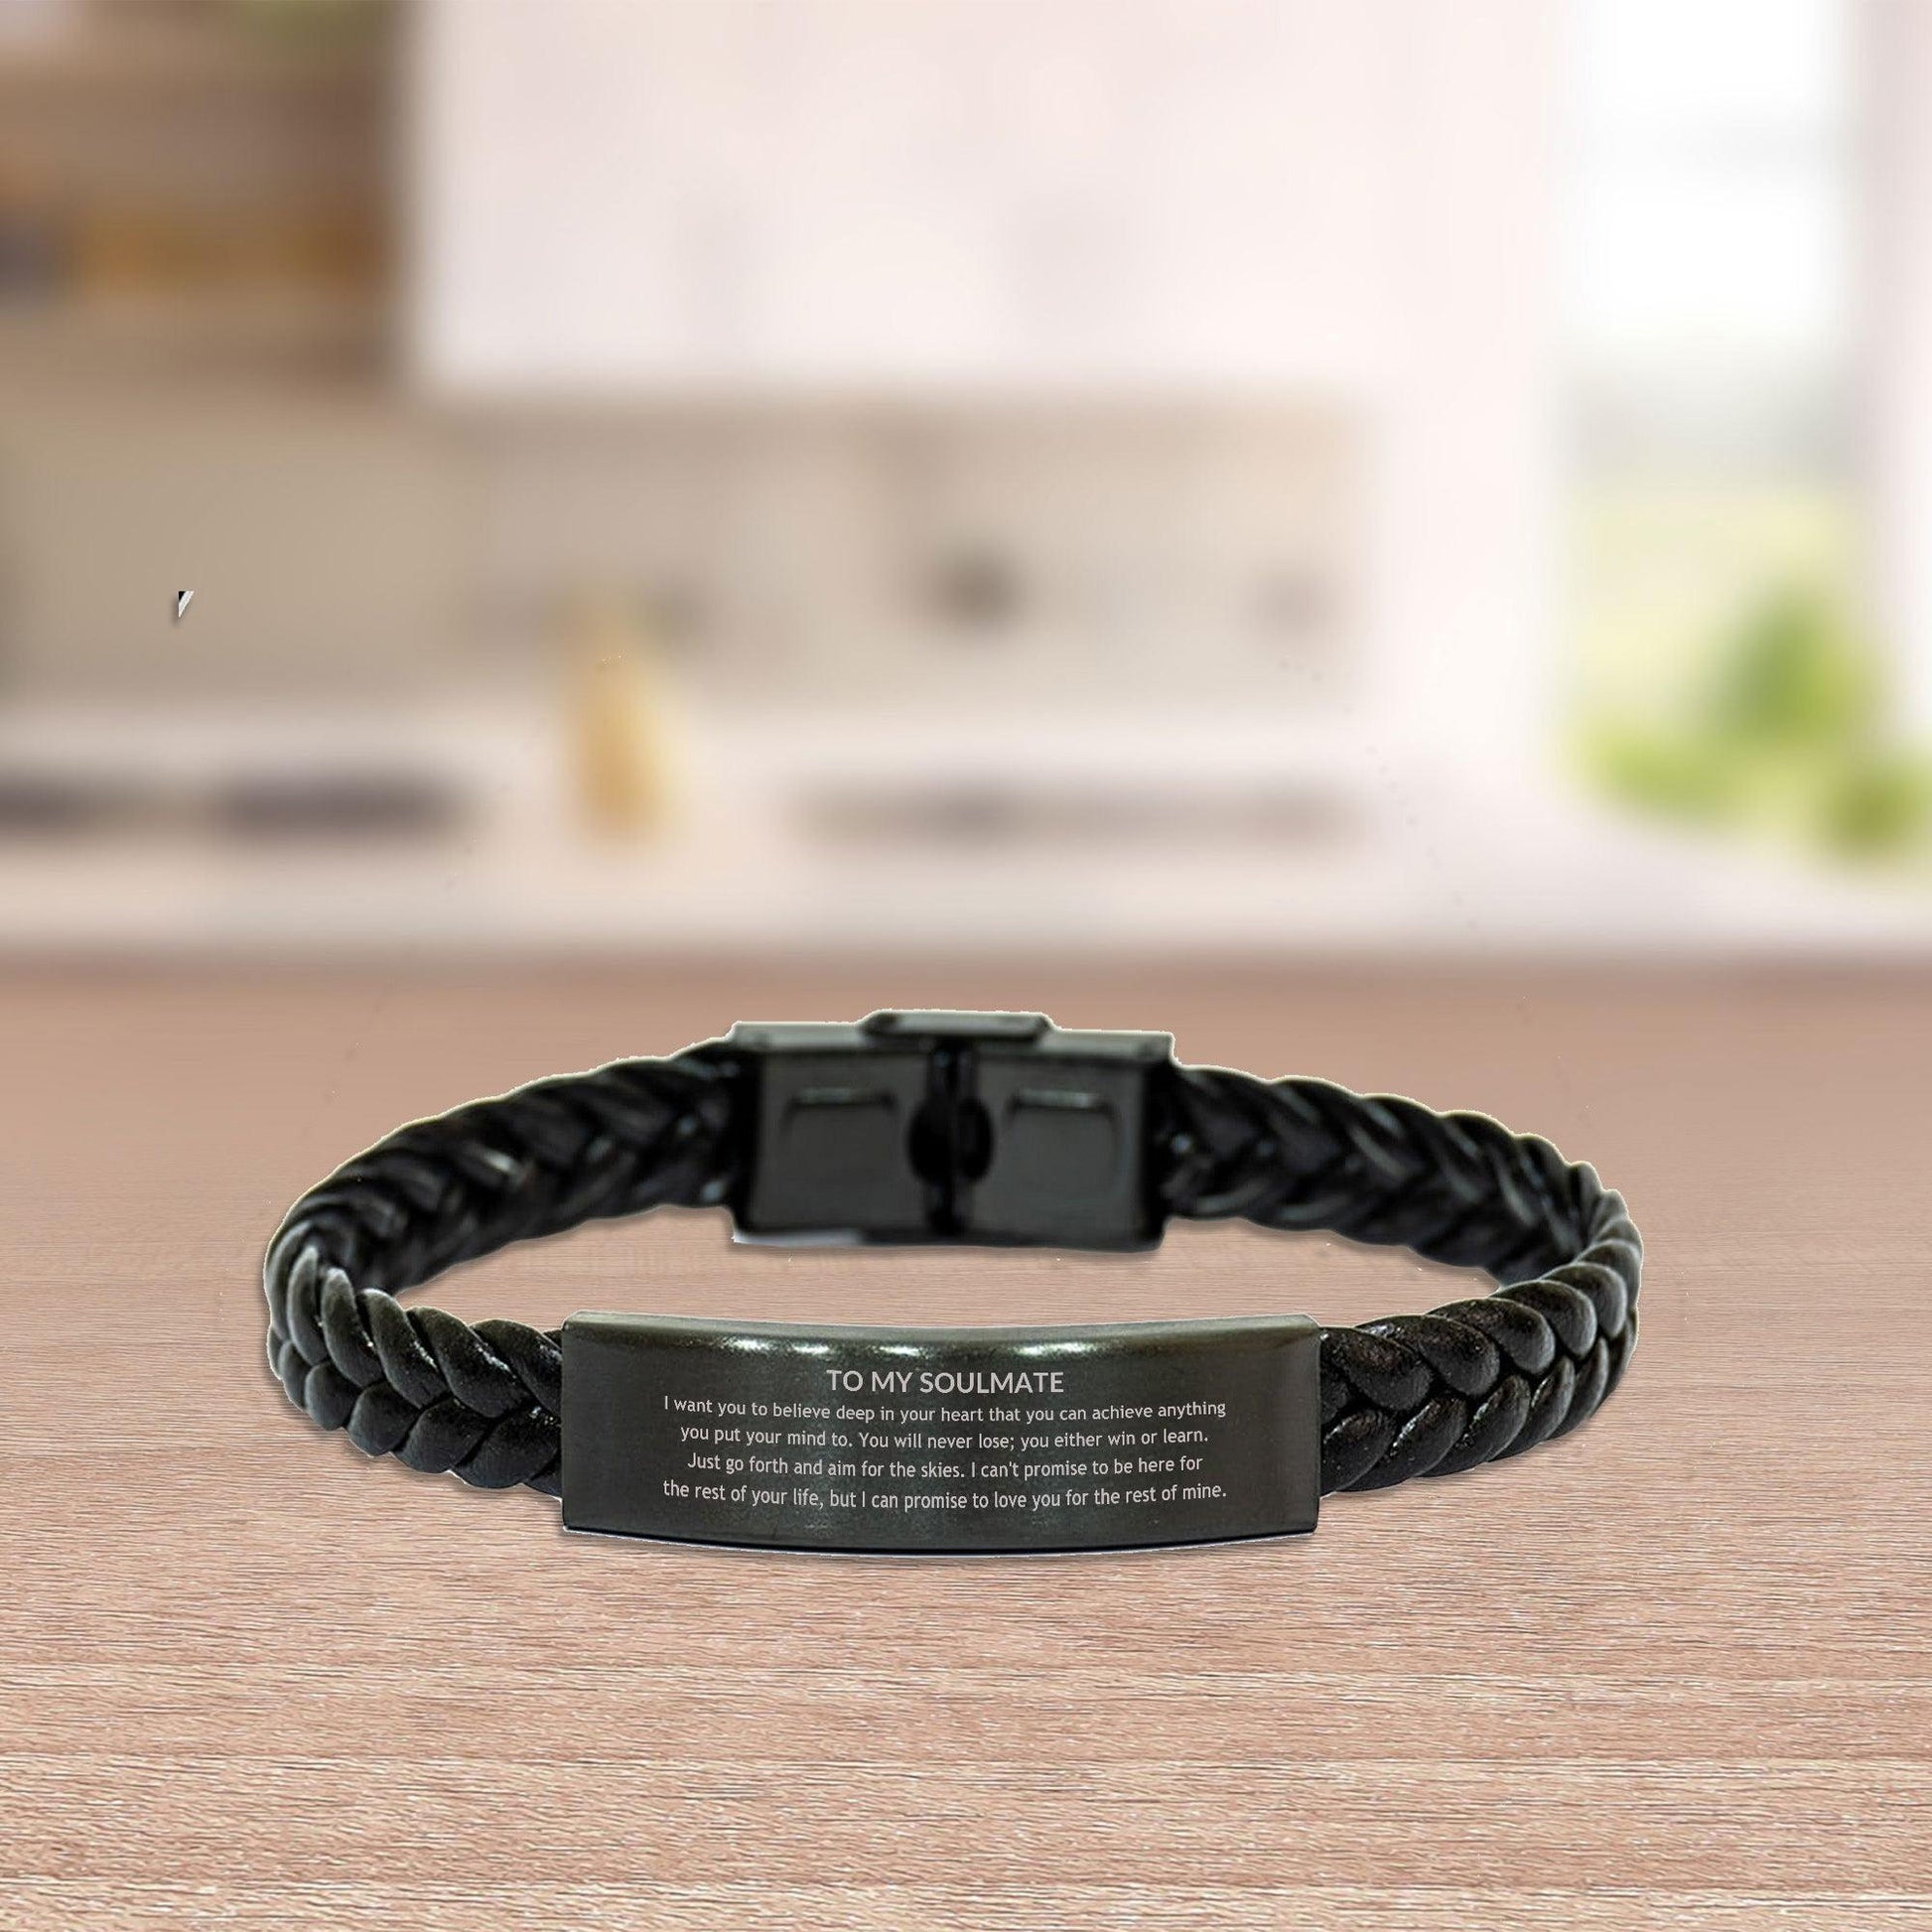 Inspirational Soulmate Braided Leather Engraved Bracelet - Behind you, all your Memories, Before you, all your Dreams - Birthday, Christmas Holiday Gifts - Mallard Moon Gift Shop